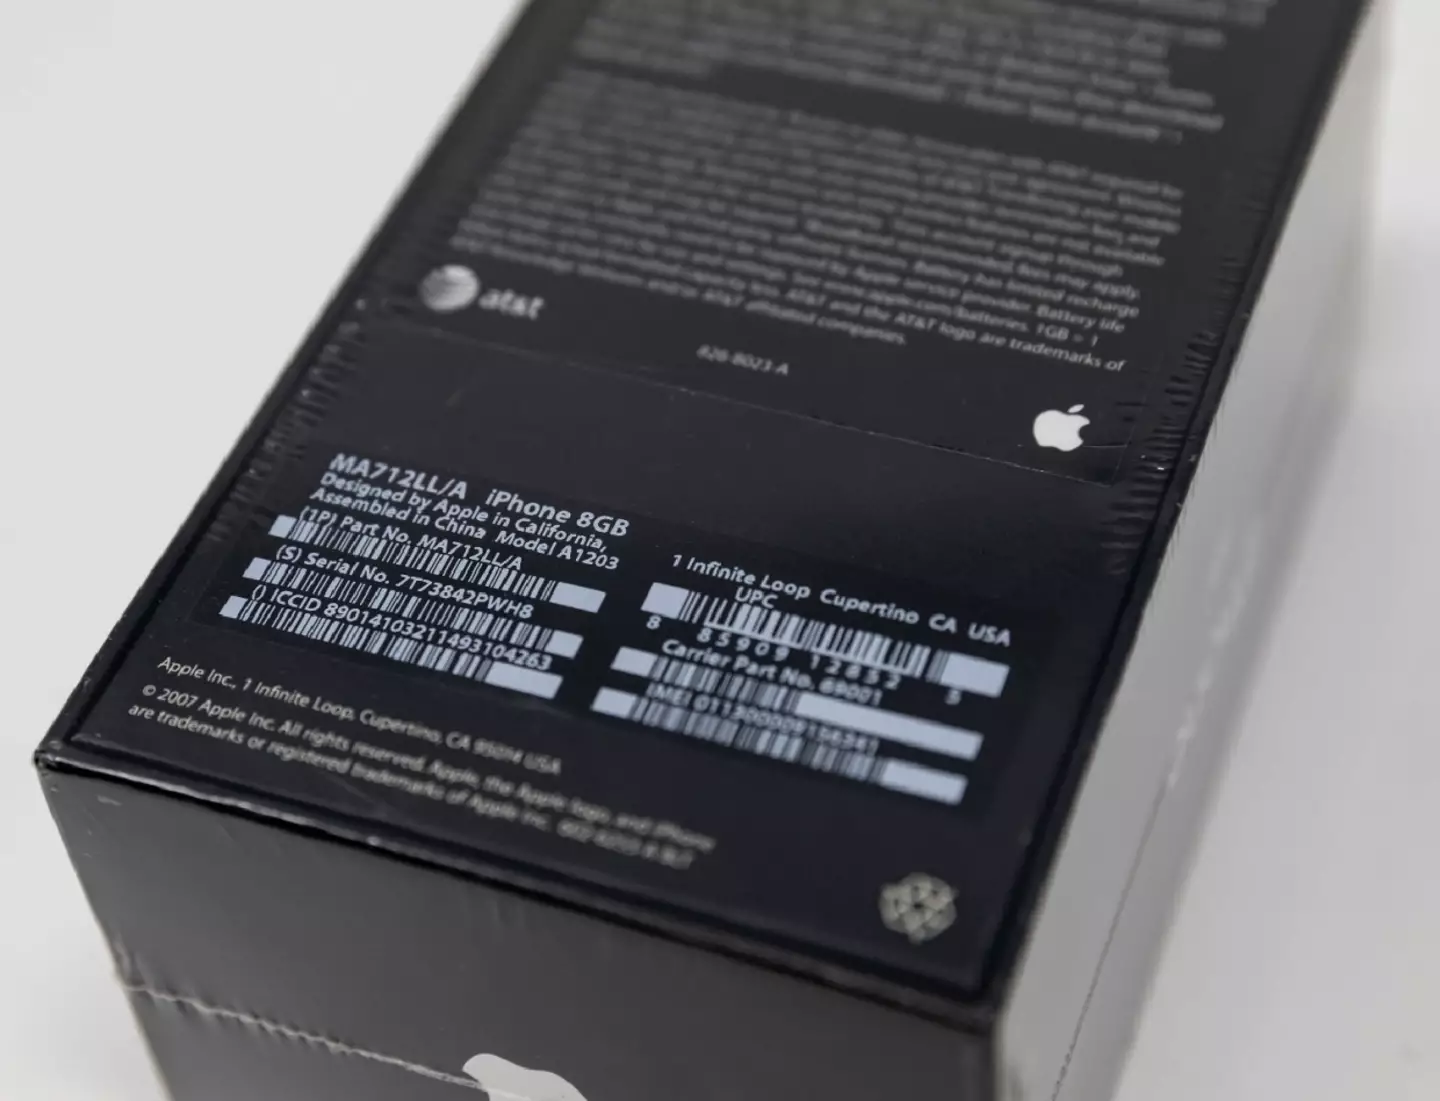 The original iPhone remained factory-sealed.